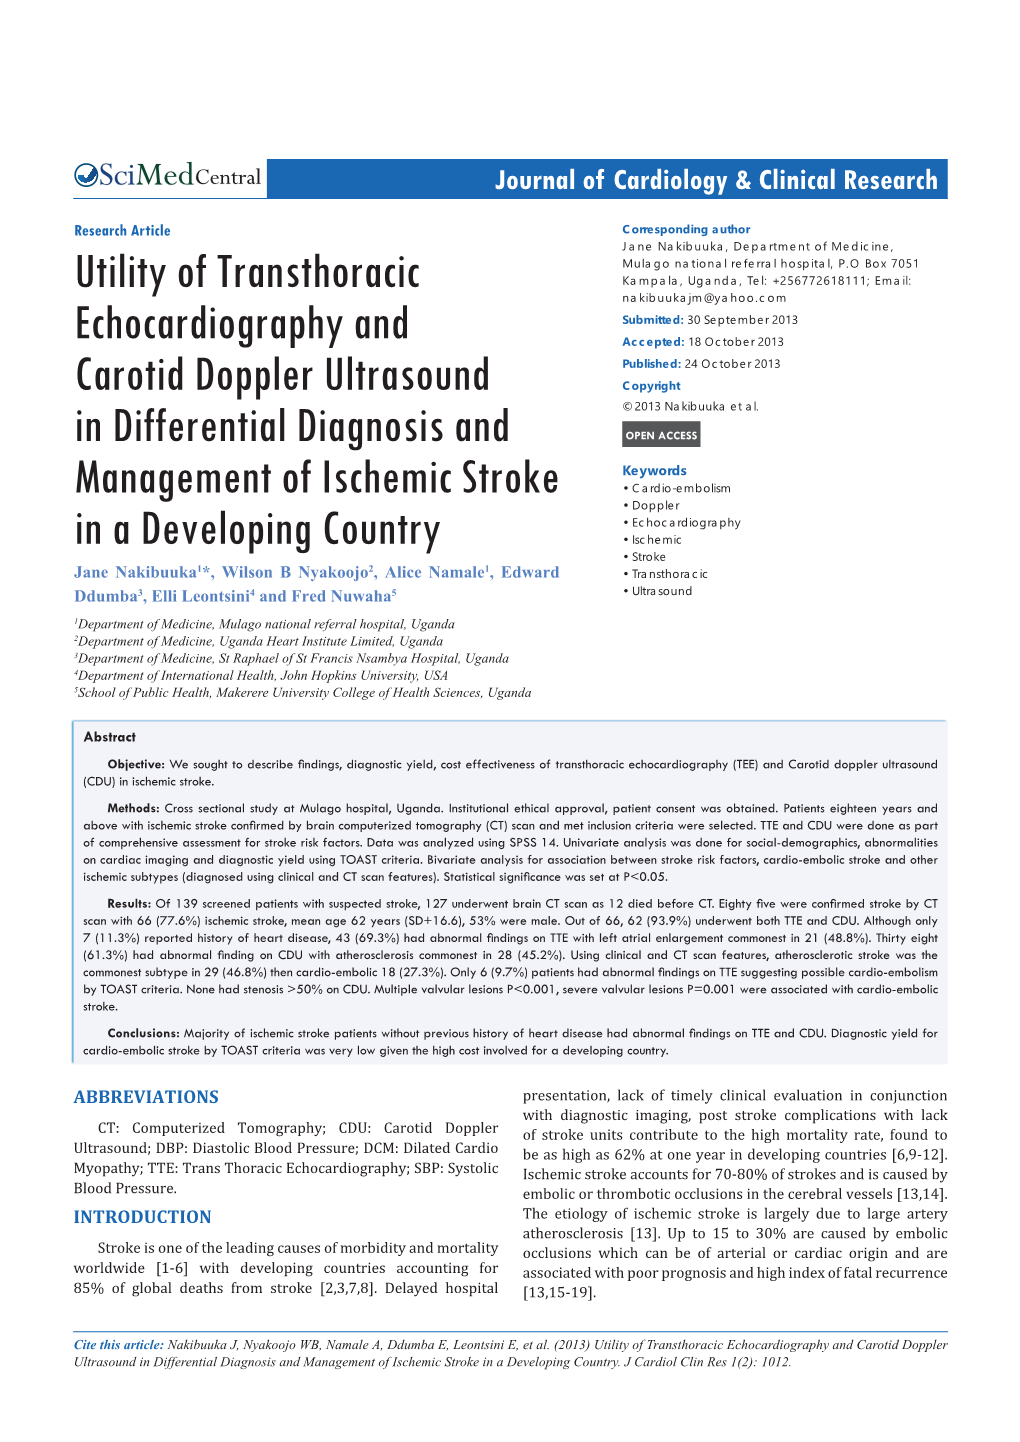 Utility of Transthoracic Echocardiography and Carotid Doppler Ultrasound in Differential Diagnosis and Management of Ischemic Stroke in a Developing Country